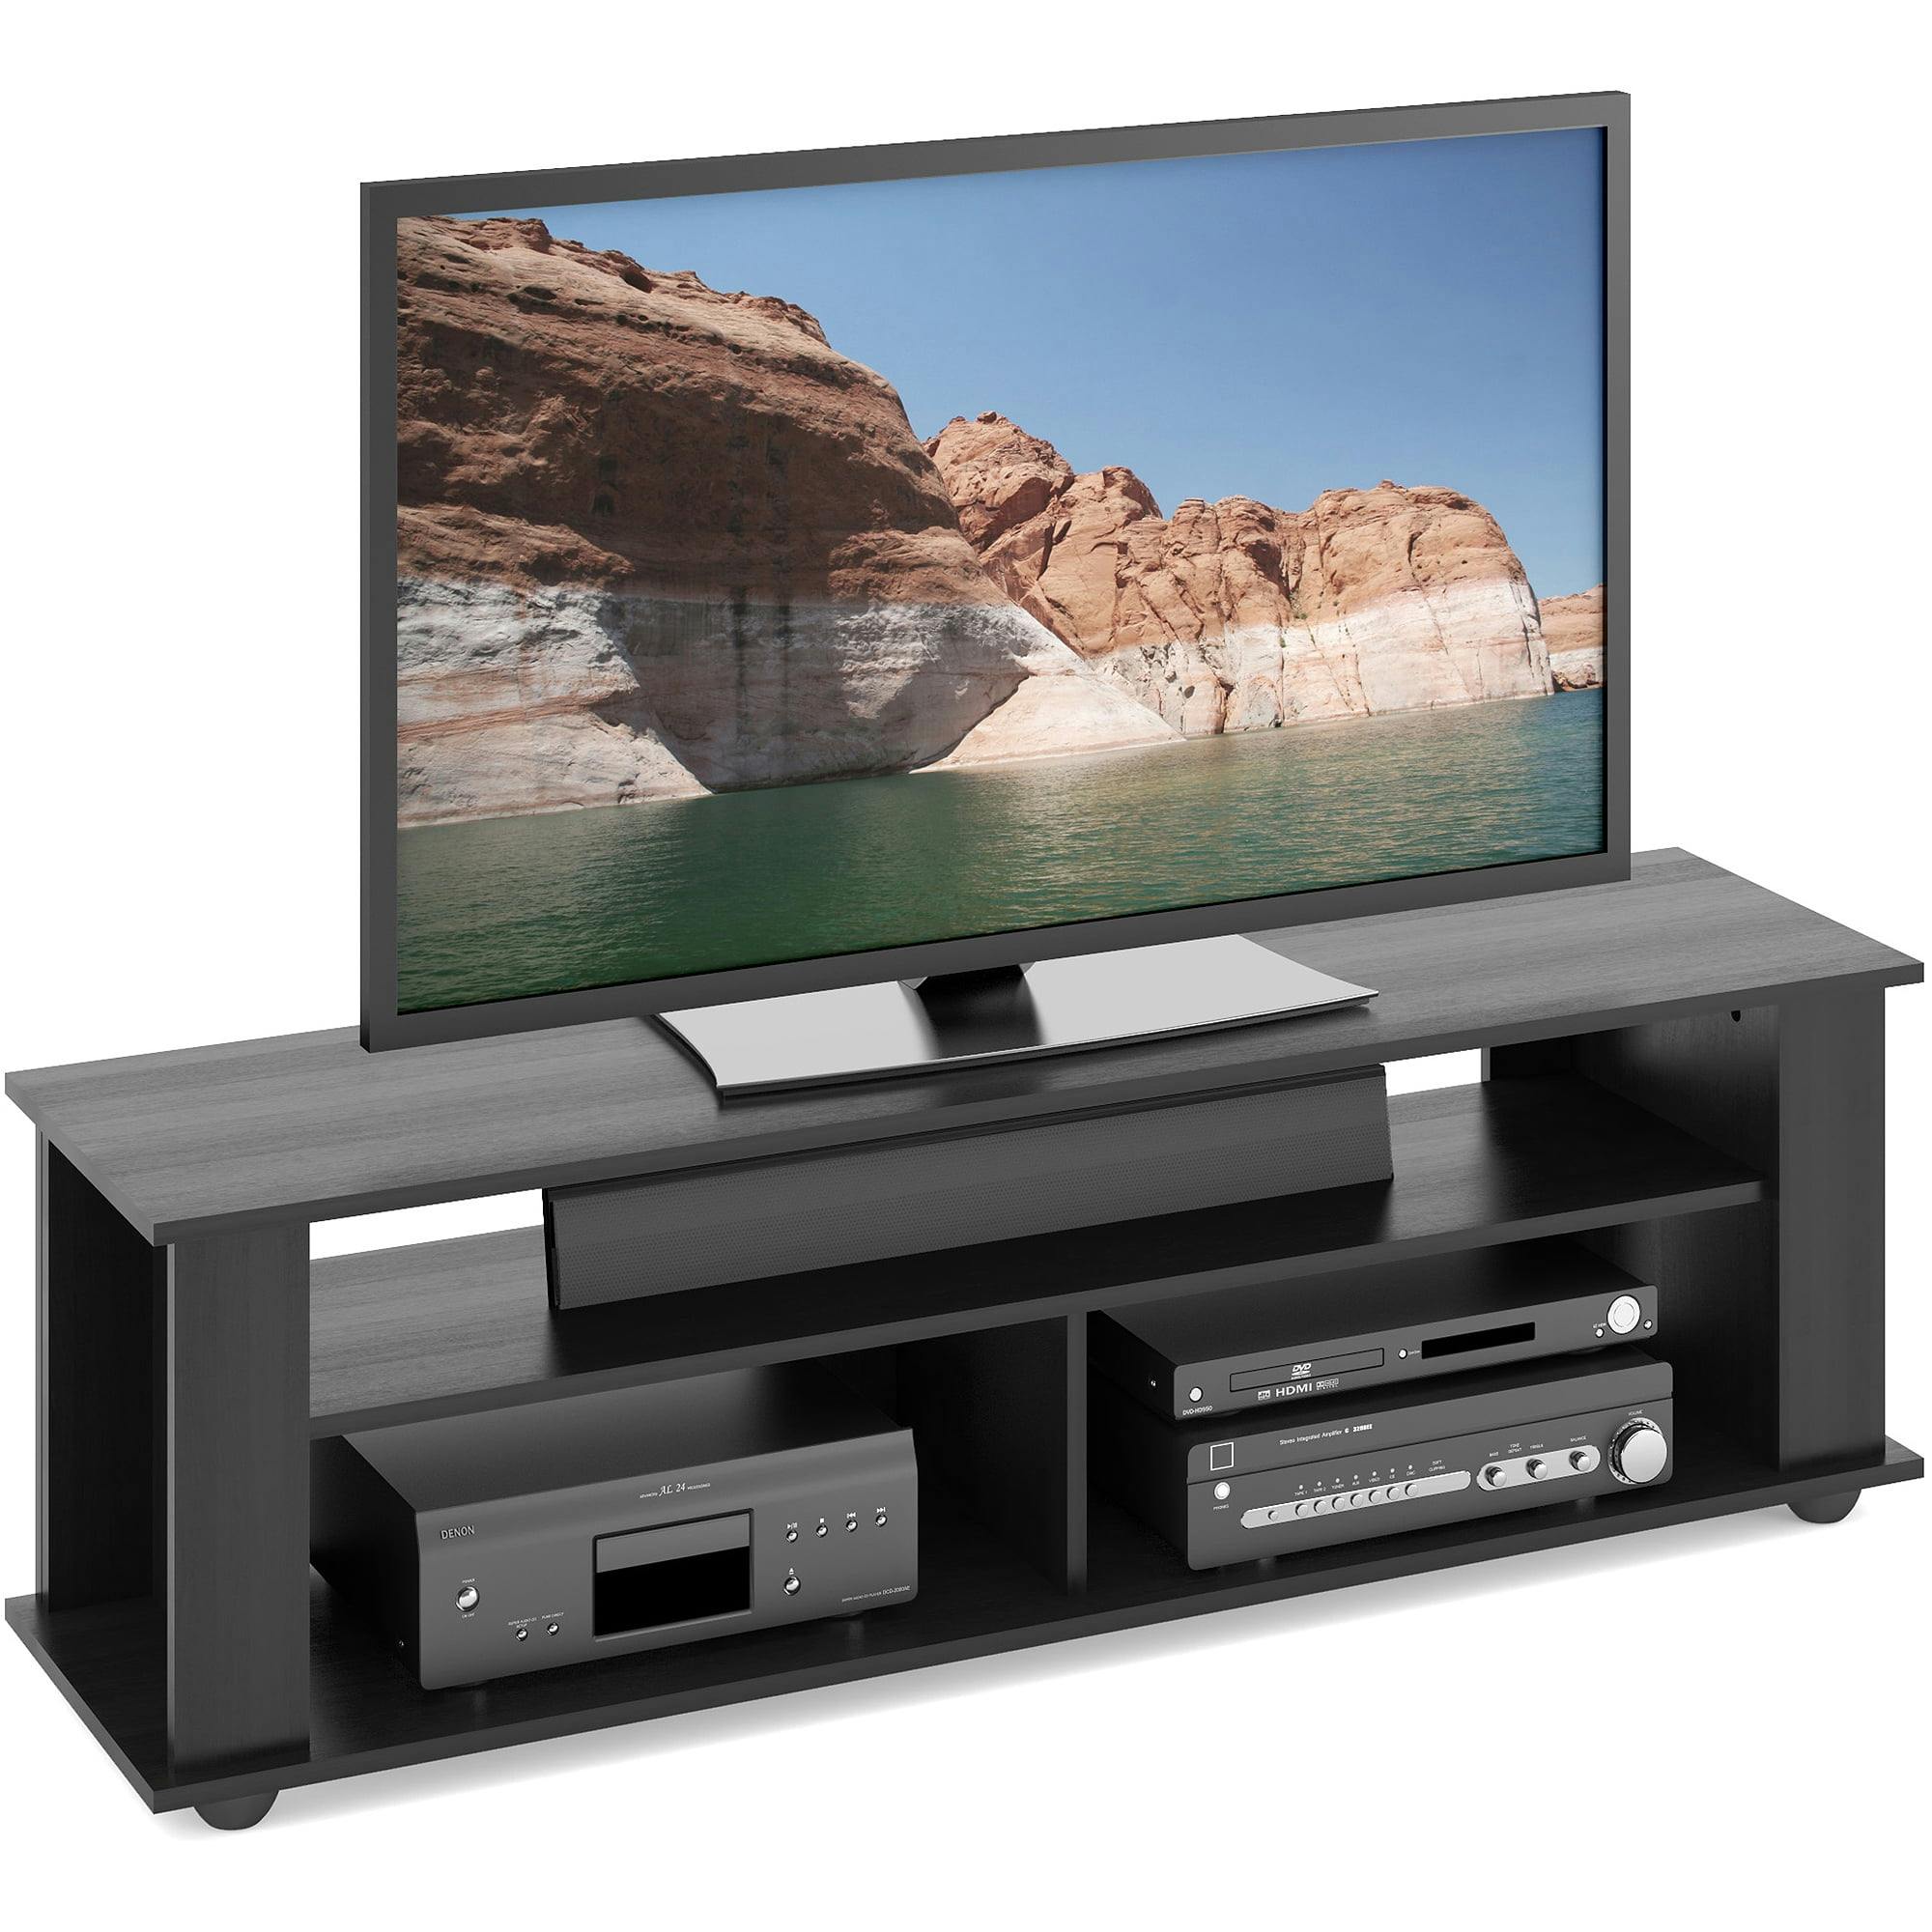 Ravenwood Black 62" Contemporary TV Stand with Open Shelving